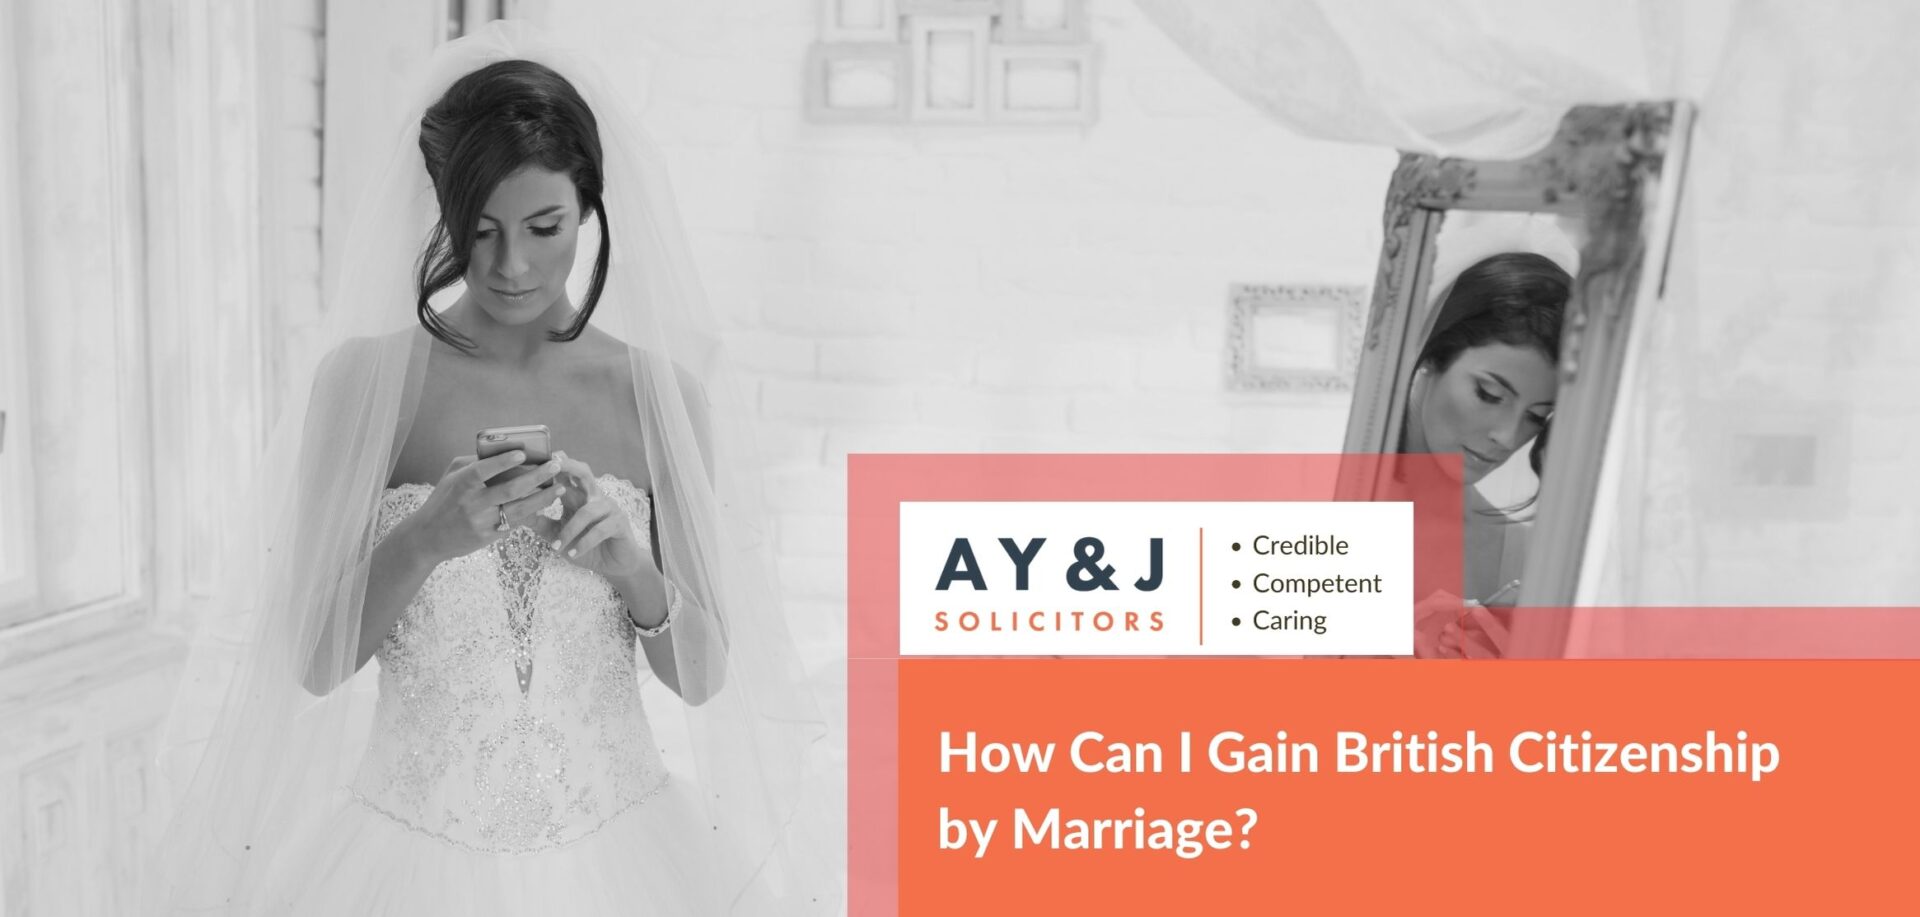 How Can I Gain British Citizenship by Marriage?